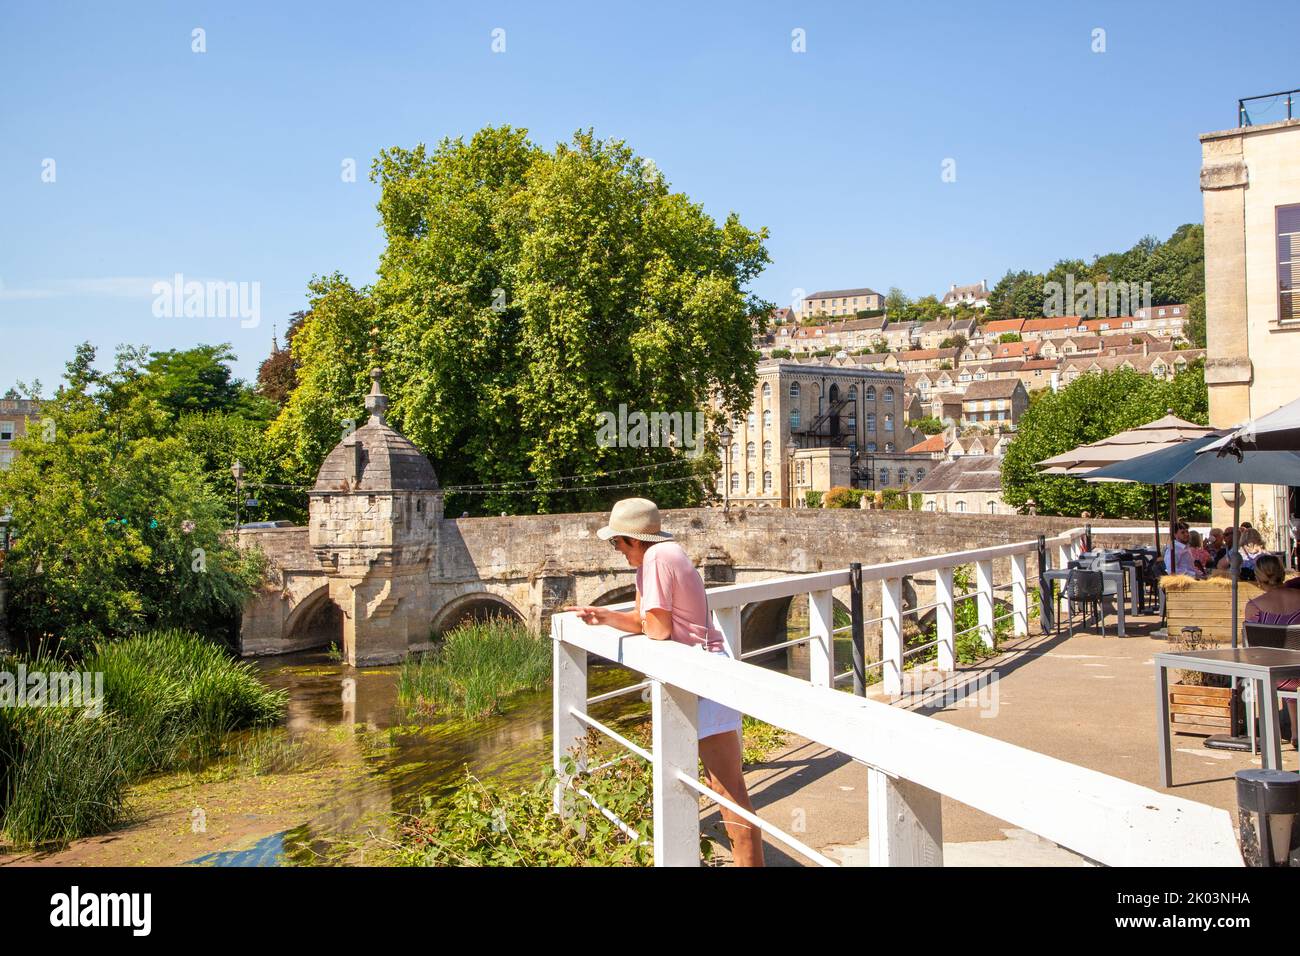 Woman viewing the river Avon passing under the old town bridge in the Wiltshire market town of Bradford on Avon  Wiltshire England Stock Photo